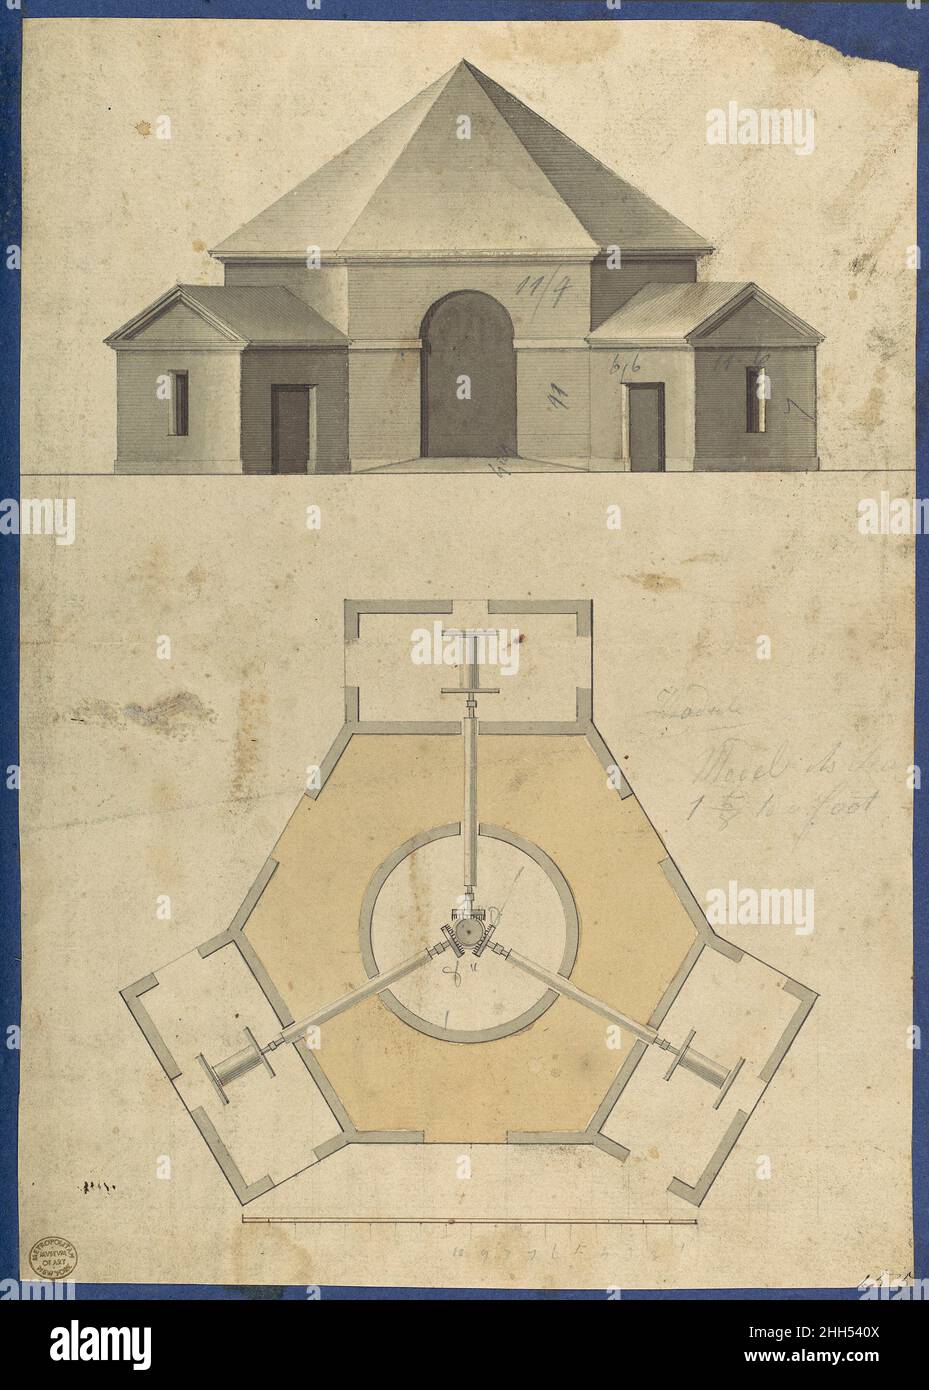 Outbuilding with Three Gears, from Chippendale Drawings, Vol. II ca. 1760–1800 Thomas Chippendale British Design for a mill or pump. Not published in Thomas Chippendale's 'Gentleman and Cabinet Maker's Director'.. Outbuilding with Three Gears, from Chippendale Drawings, Vol. II  390685 Stock Photo